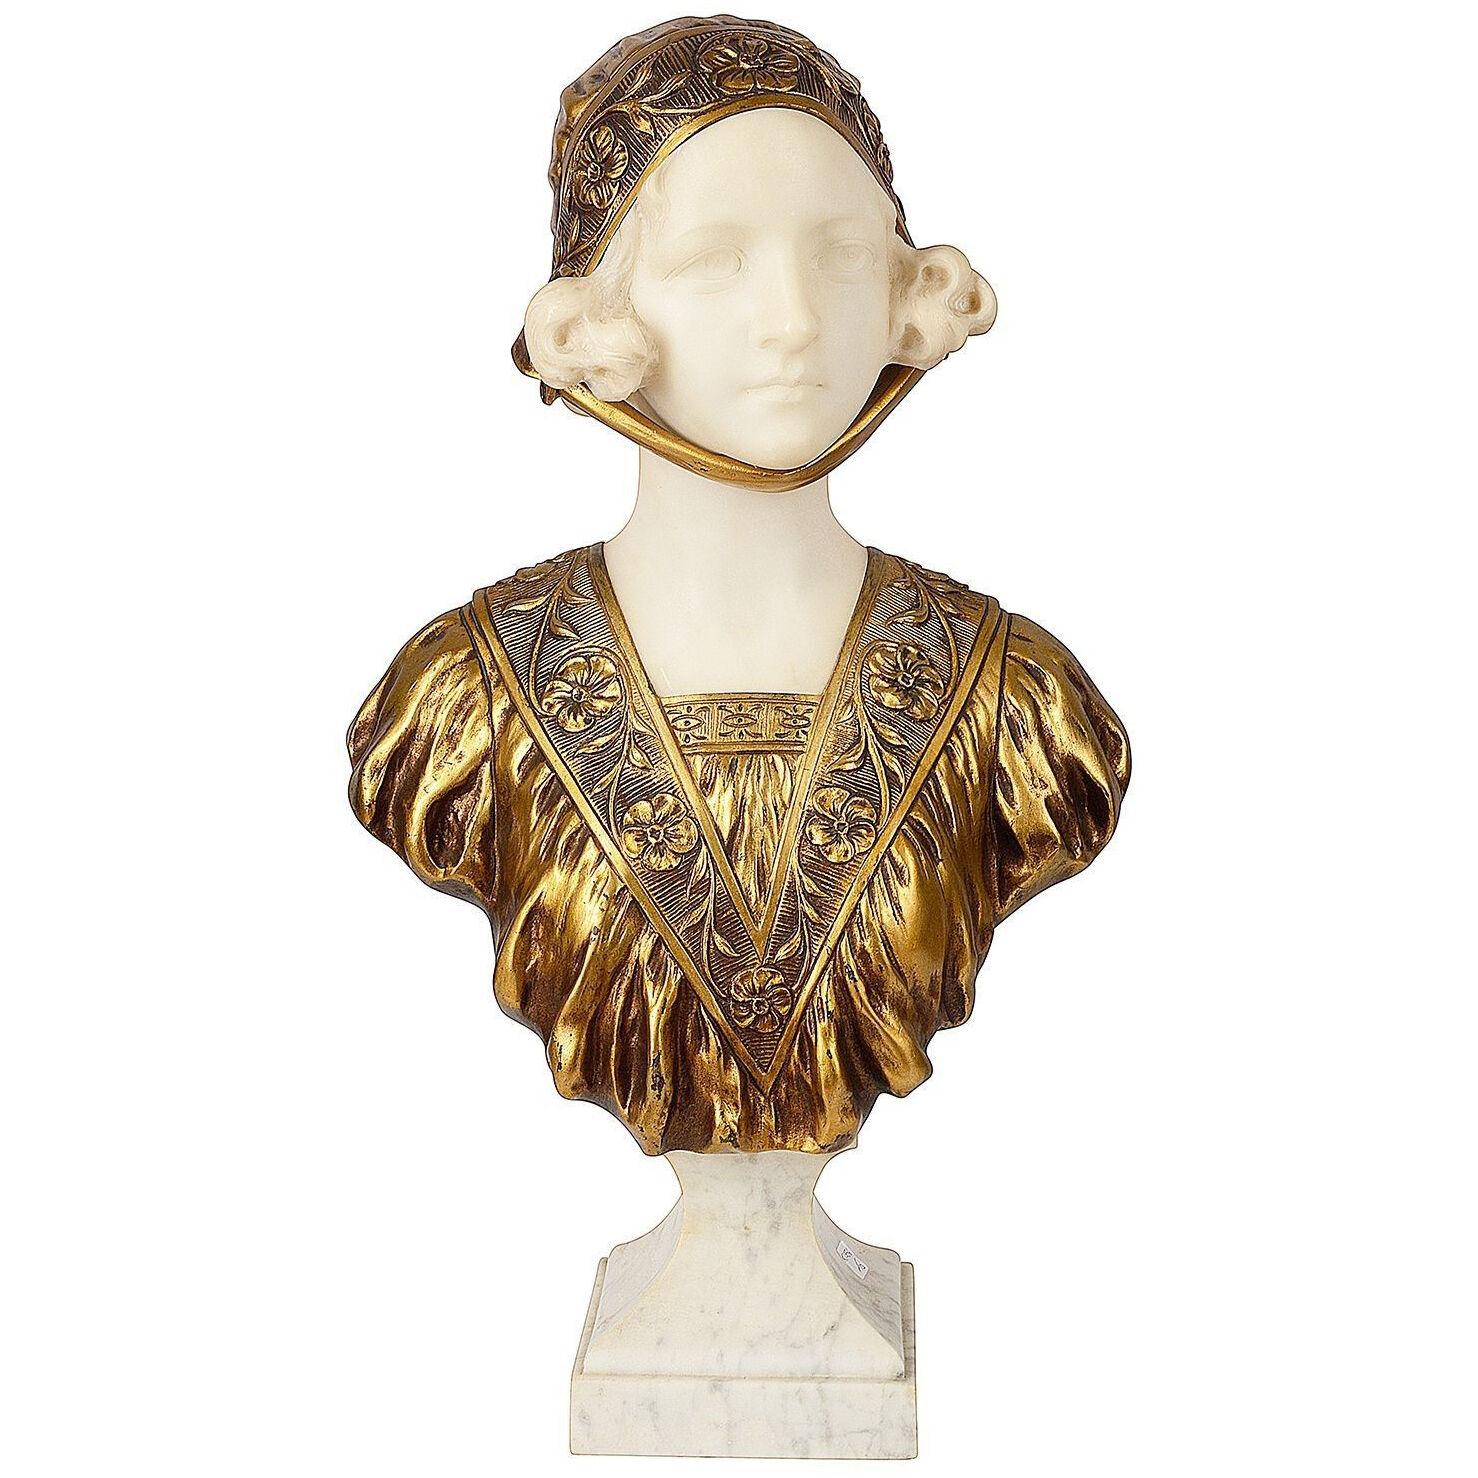 G.V. Vaerenbergh, marble and ormolu bust of a young girl.